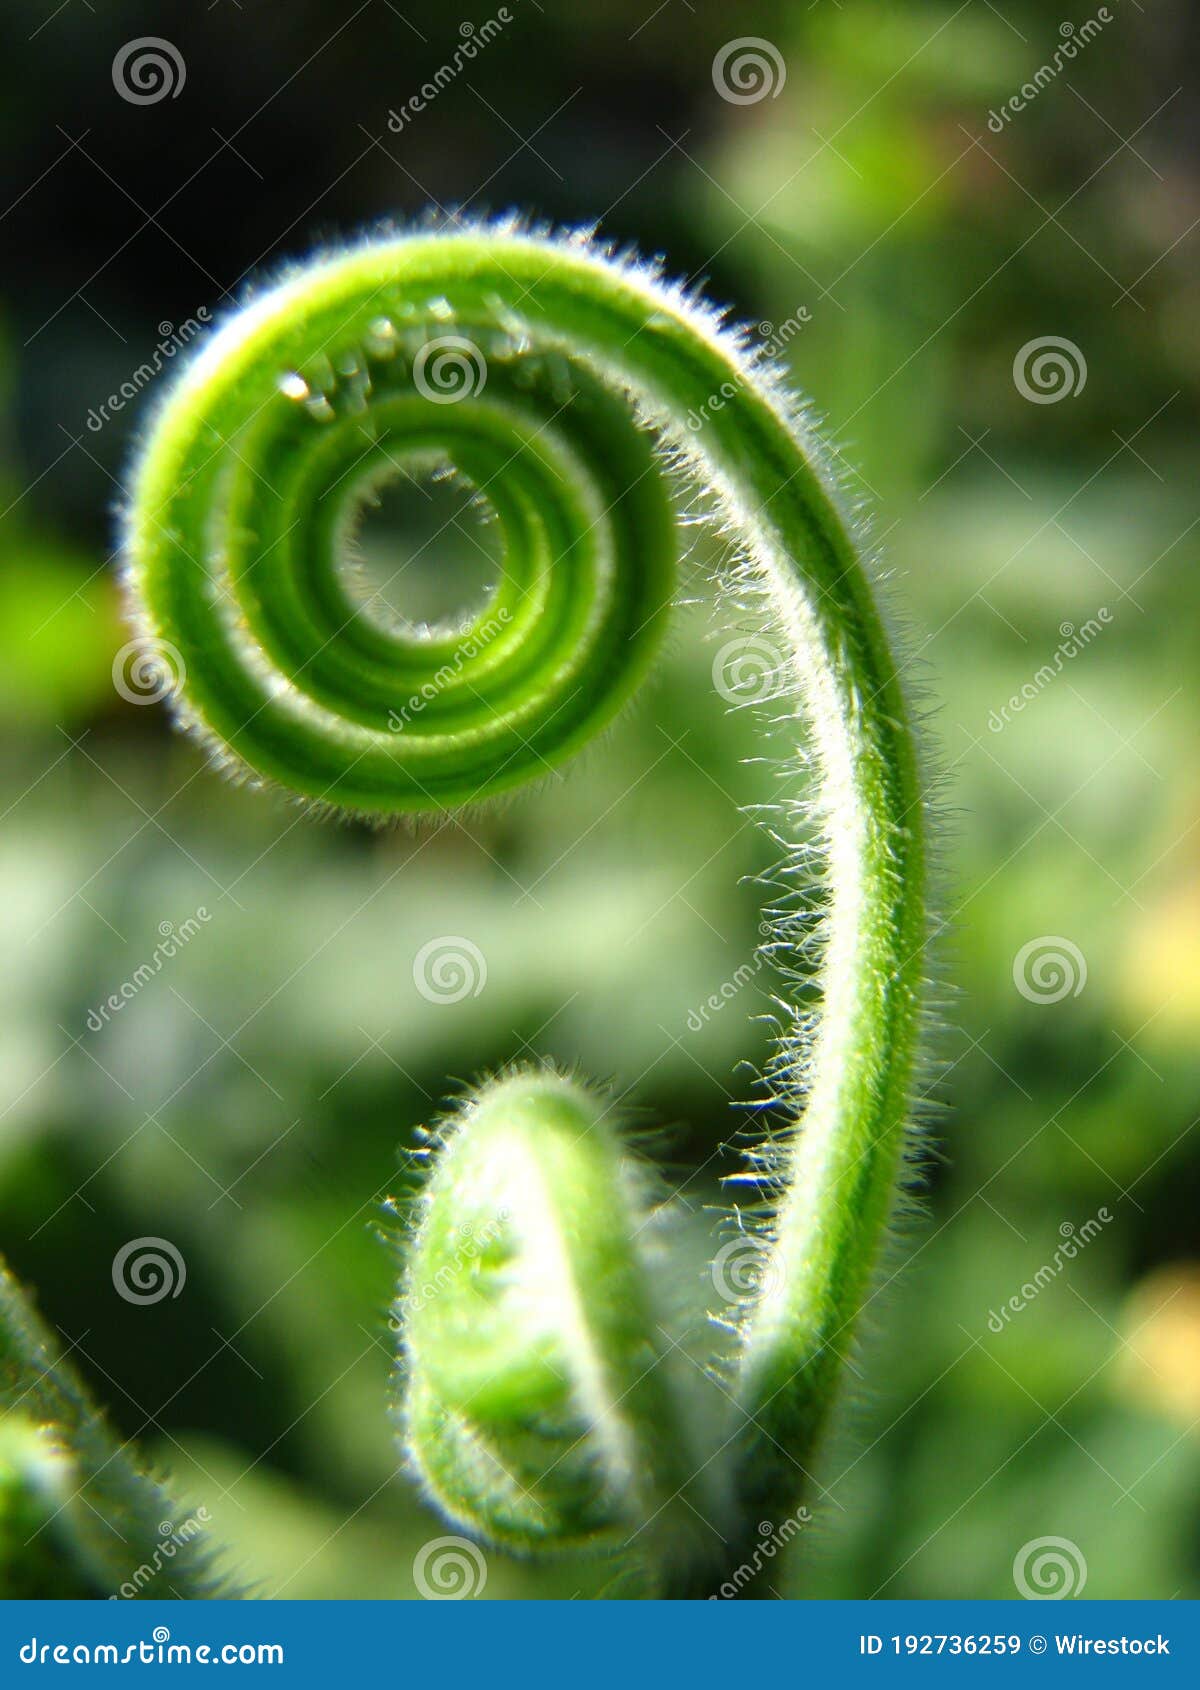 Closeup Shot of Green Spiral Plant with Thorns Stock Image - Image of gardening, spring: